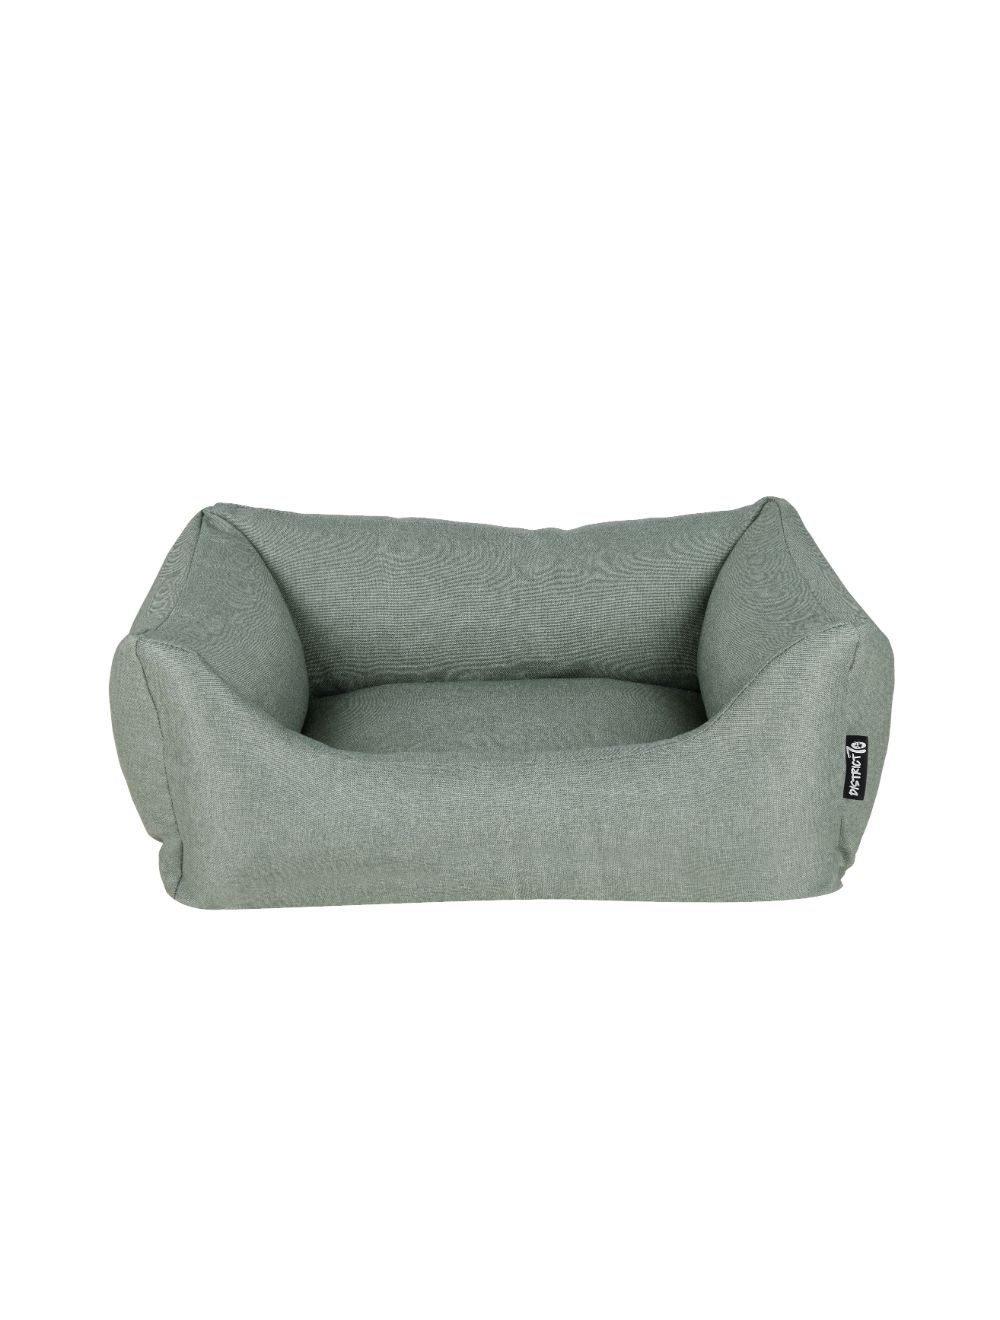 District70 - CLASSIC Box Bed, Cactus Green 80x60cm - (871720261491)